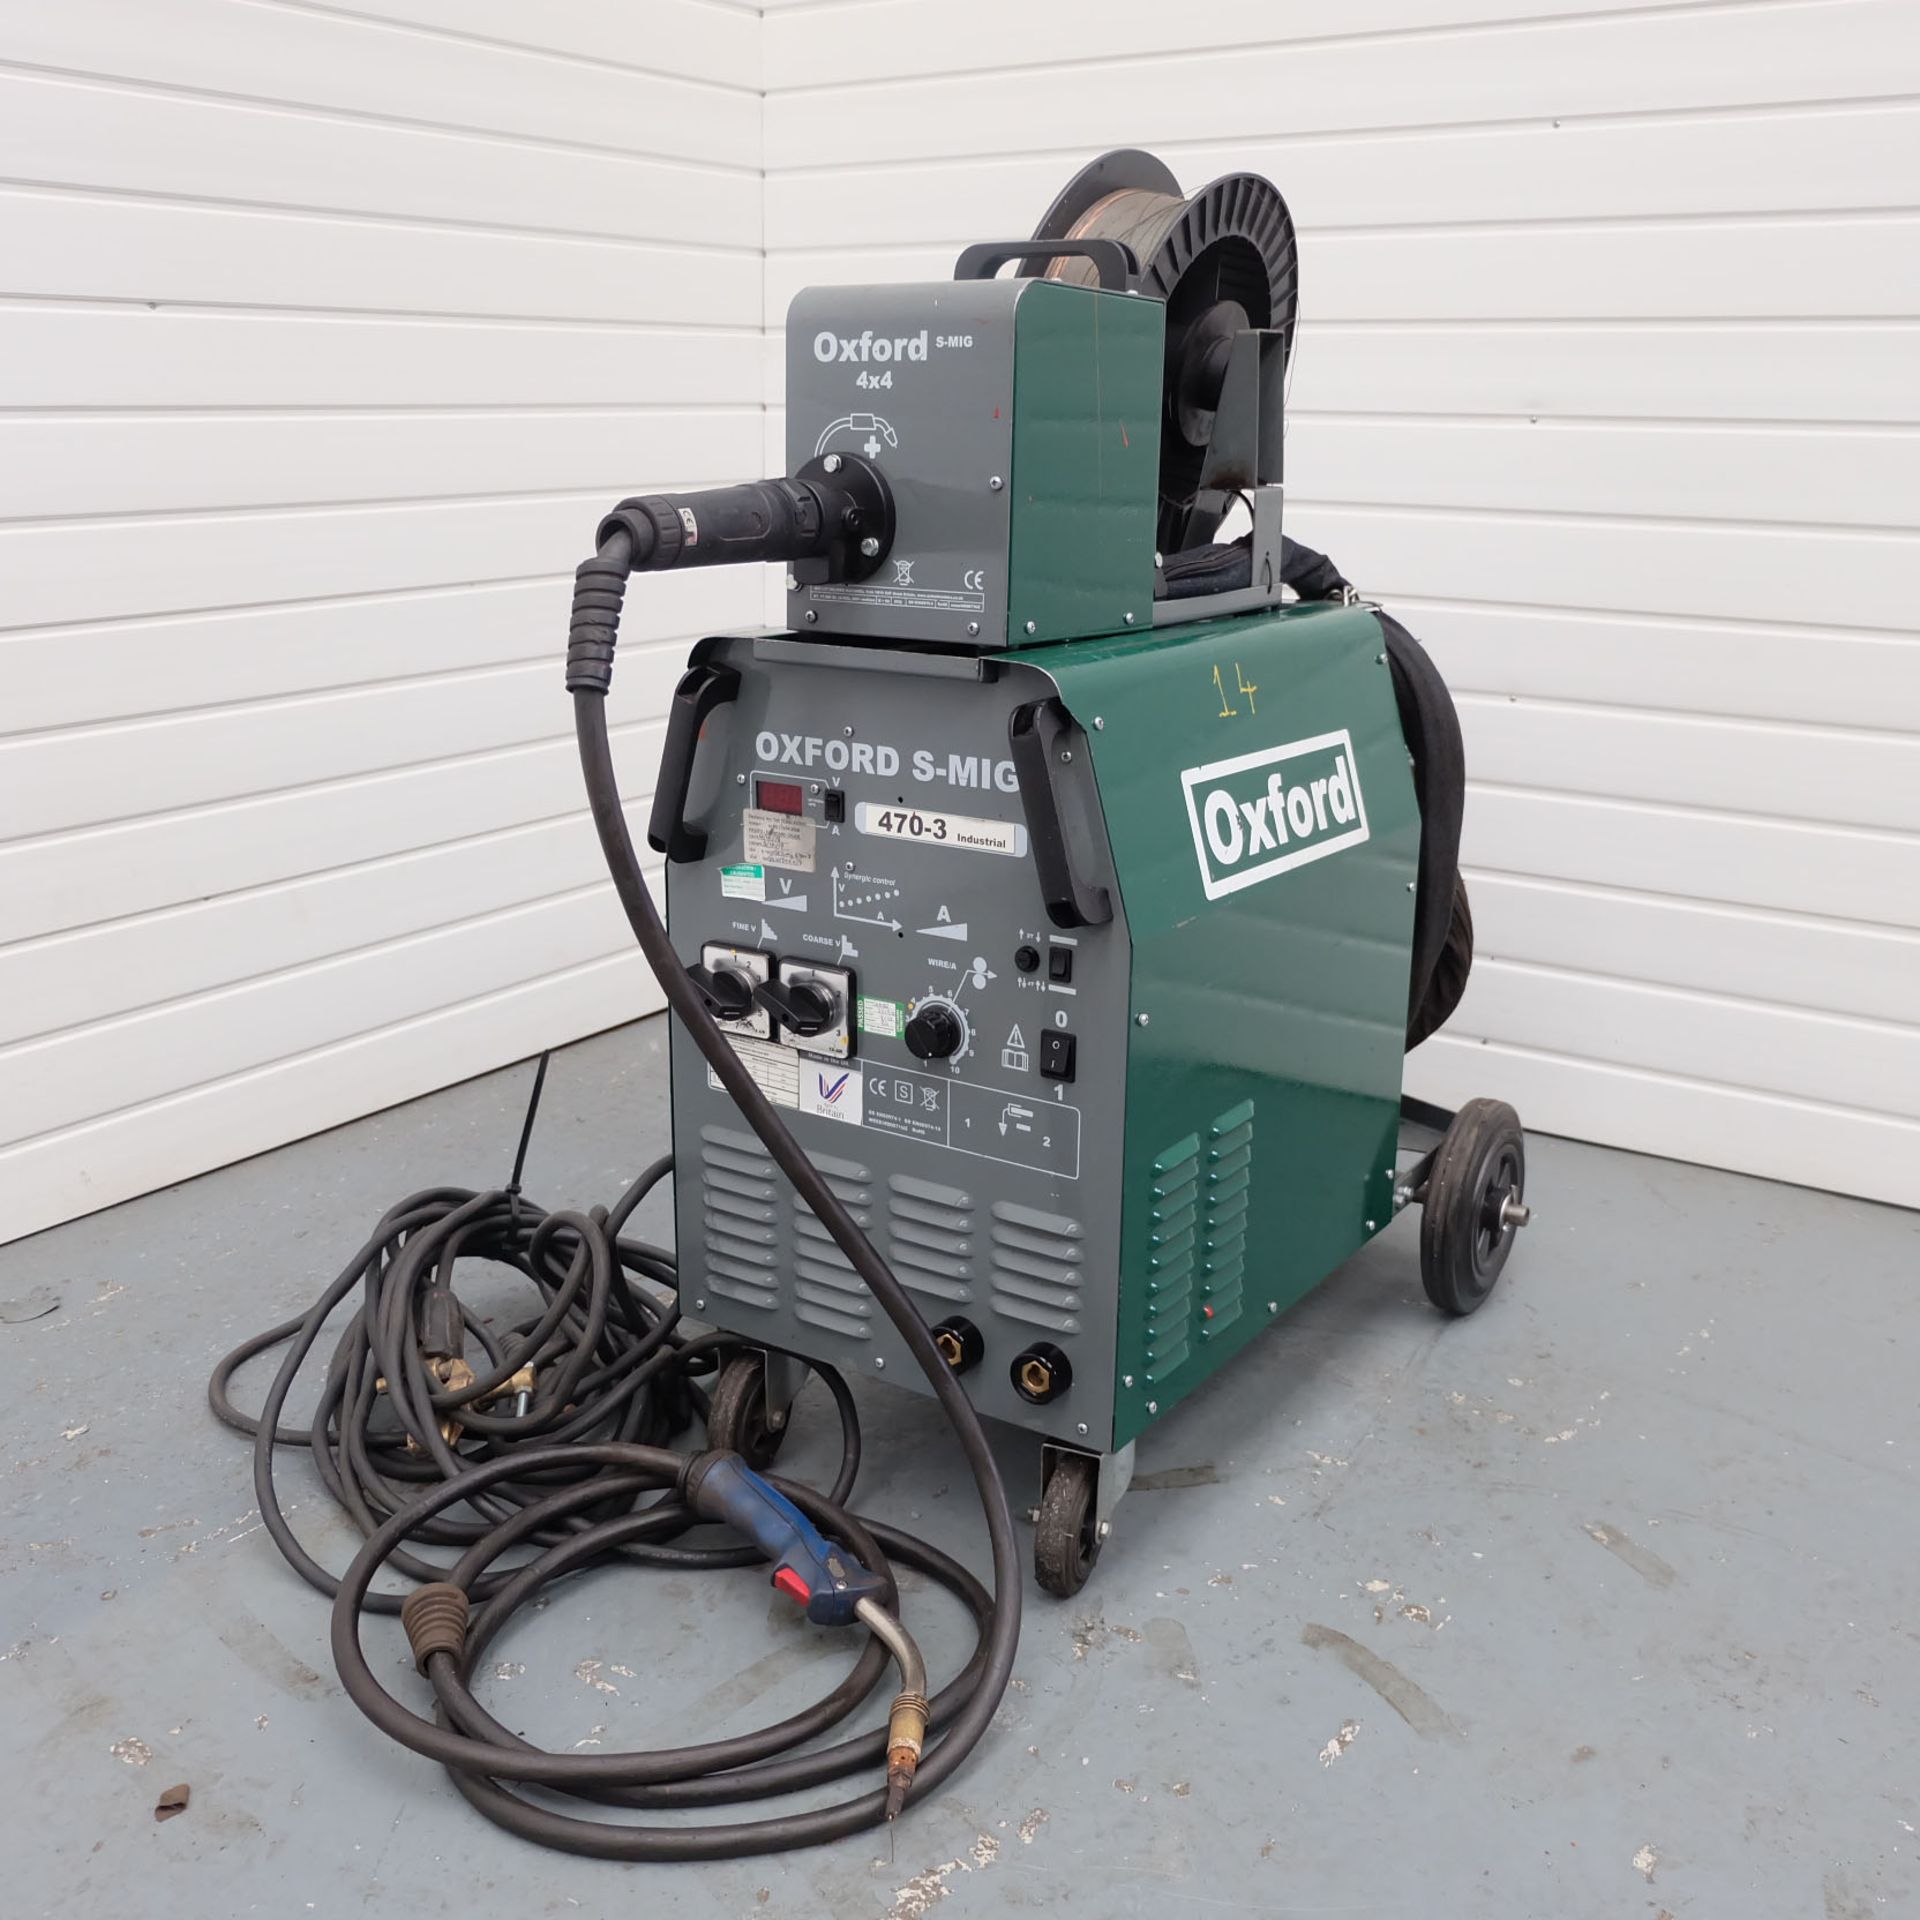 Oxford S-Mig Type 470-3 Industrial Mig Welder With Separate Wire Feed.